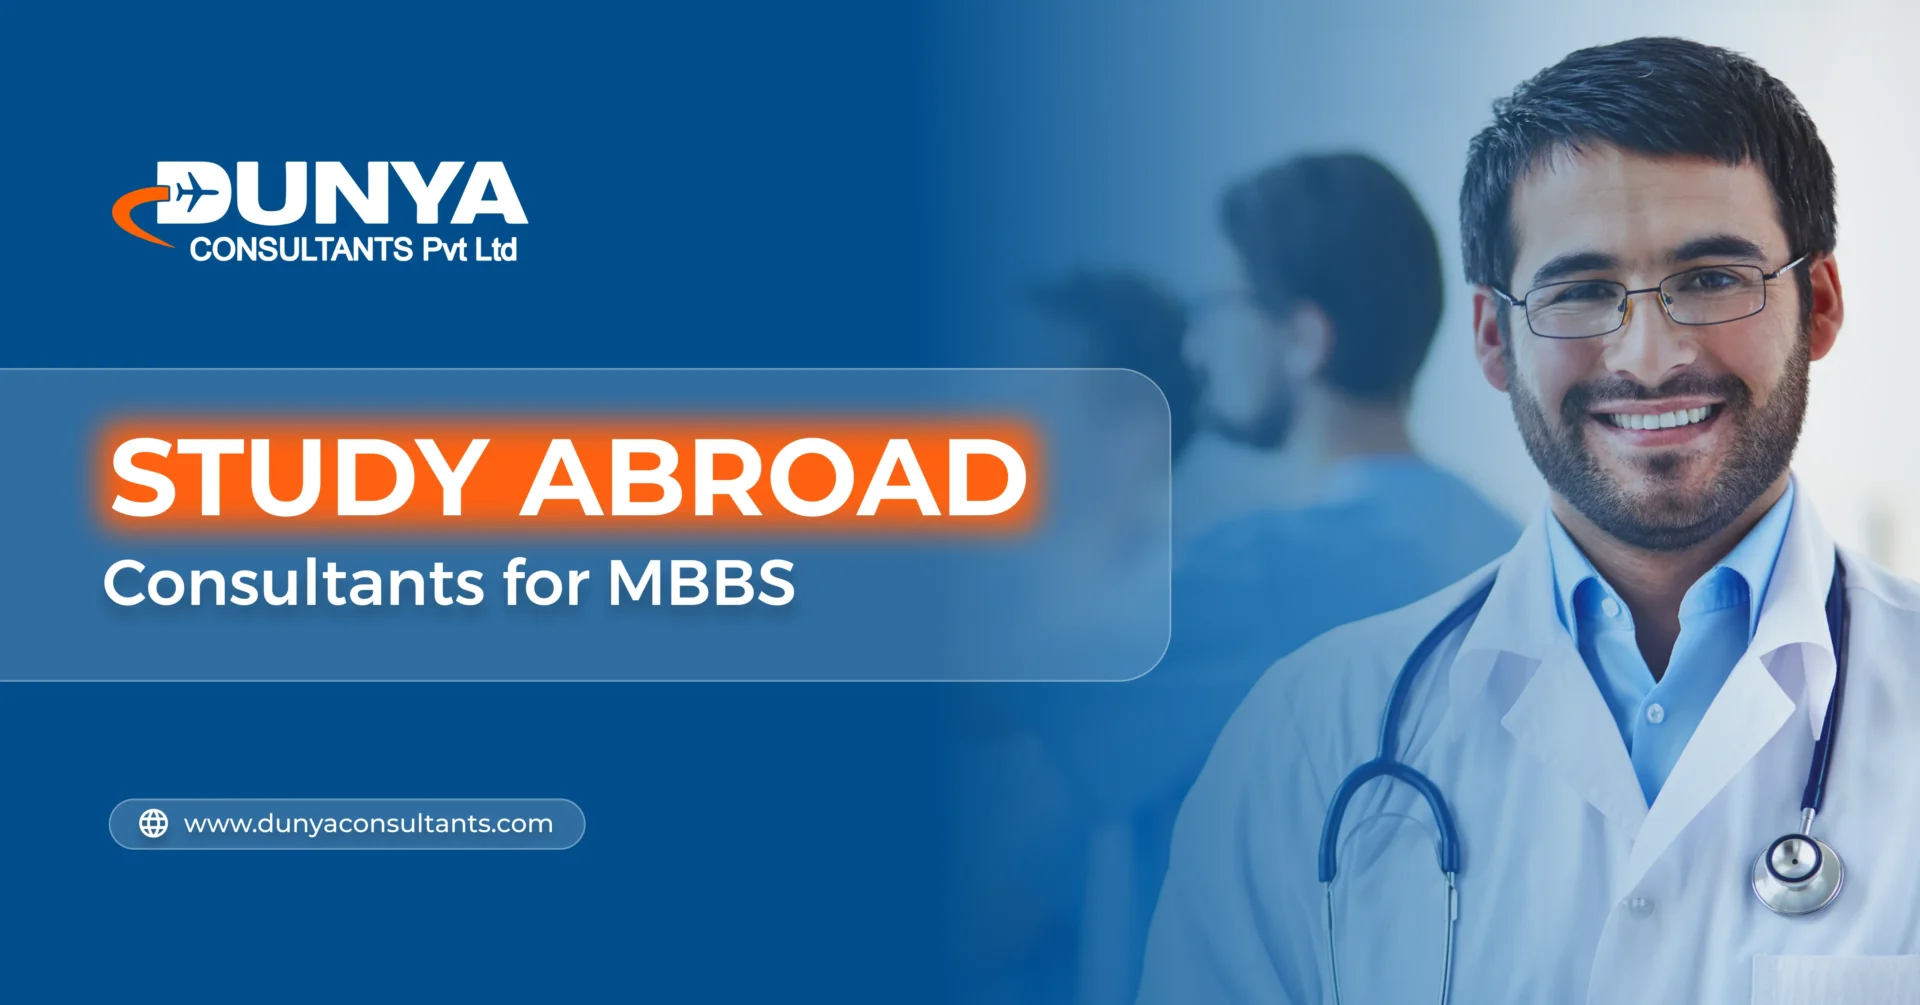 Study abroad consultants for MBBS